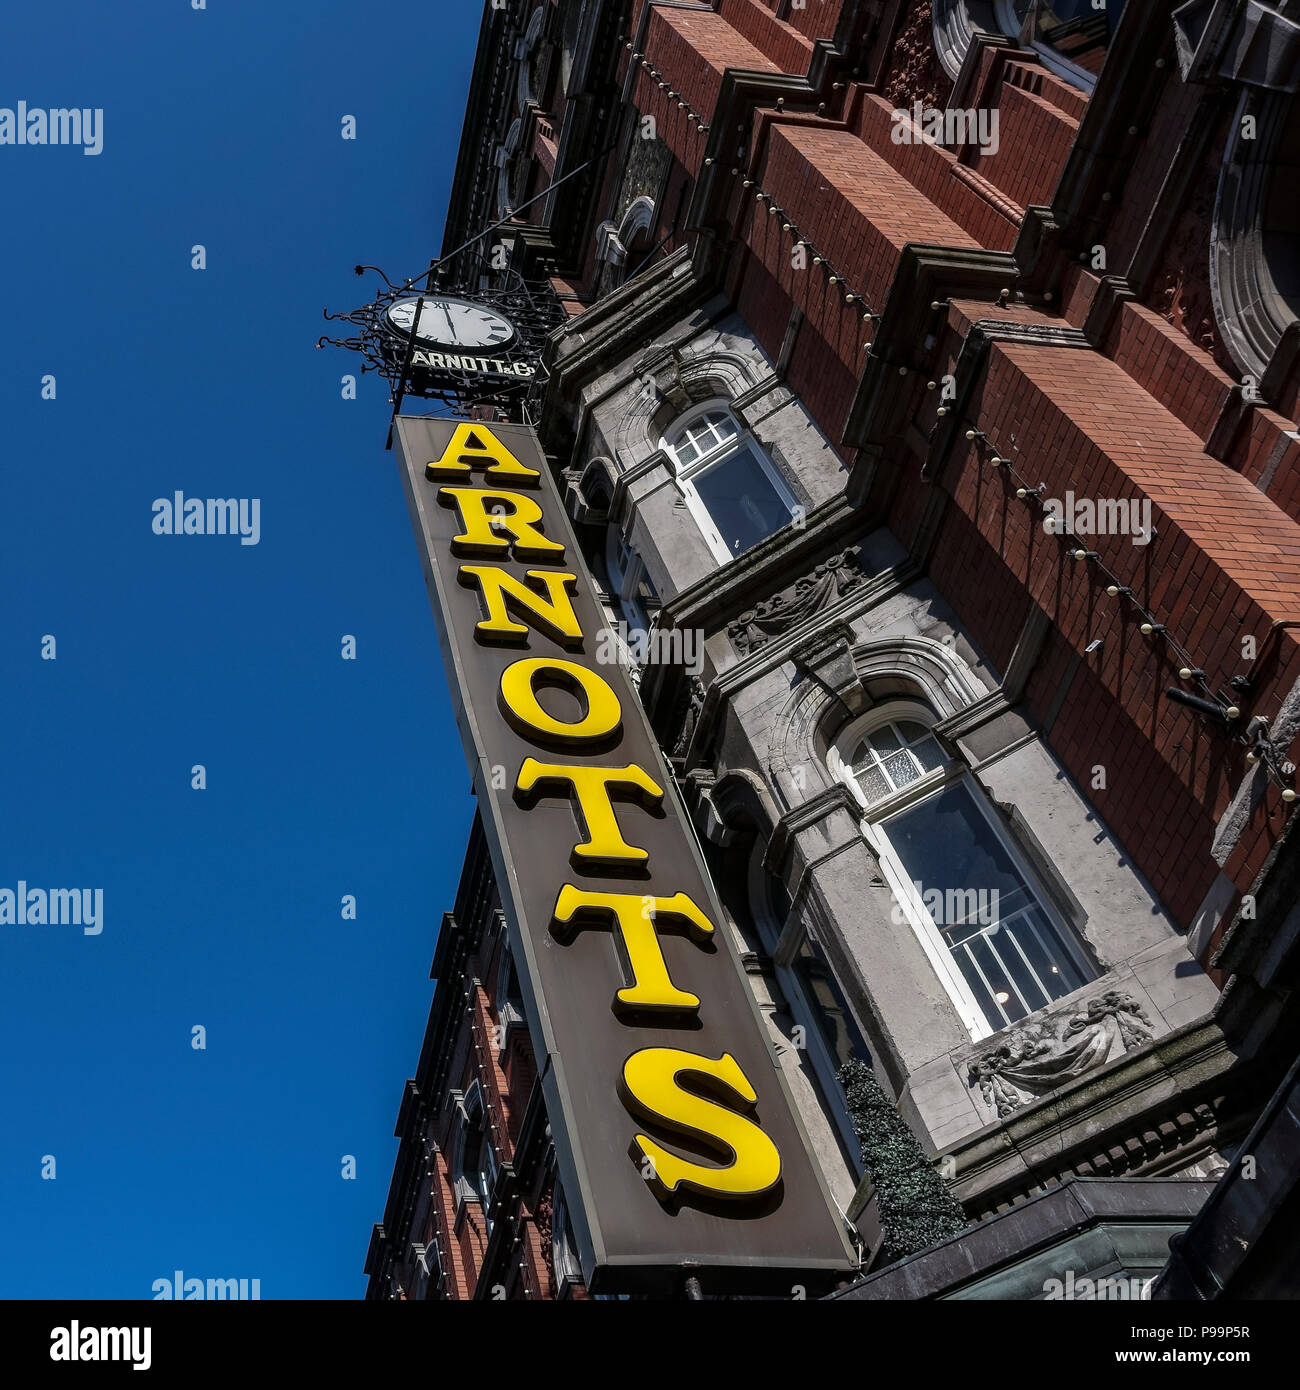 Shopping,Arnotts Department Store sign, brownstone building facade, Henry Street, Dublin, Ireland, Europe. Clear blue sky, copy space, low angle view. Stock Photo